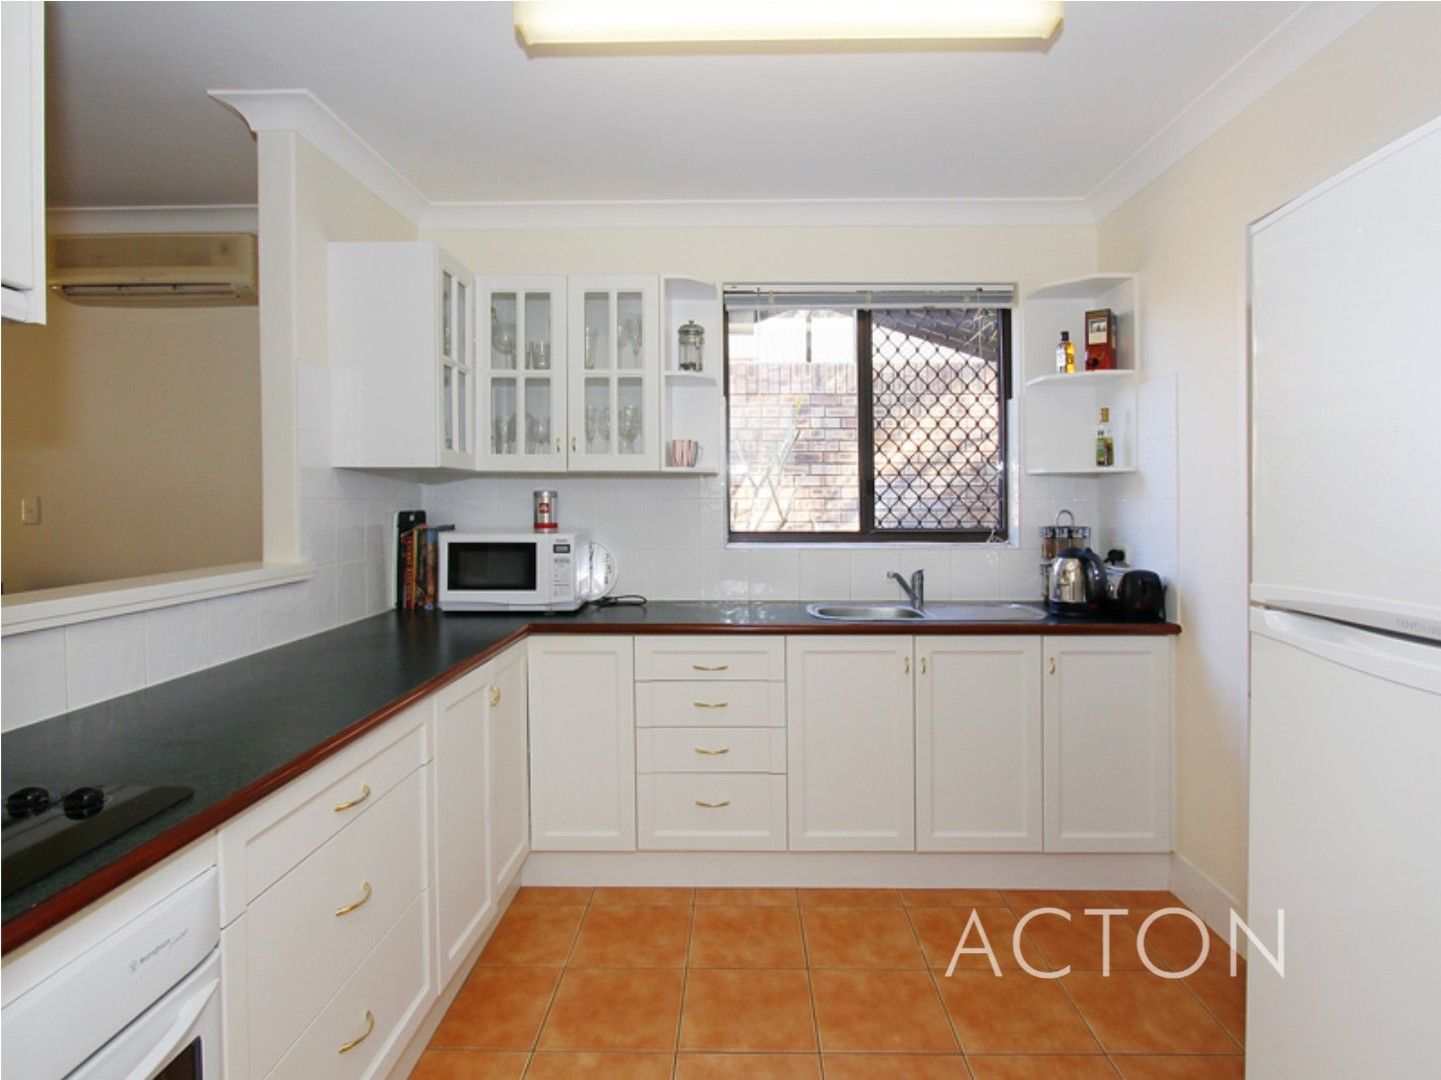 2 bedrooms Apartment / Unit / Flat in 2/3 Strickland Street SOUTH PERTH WA, 6151